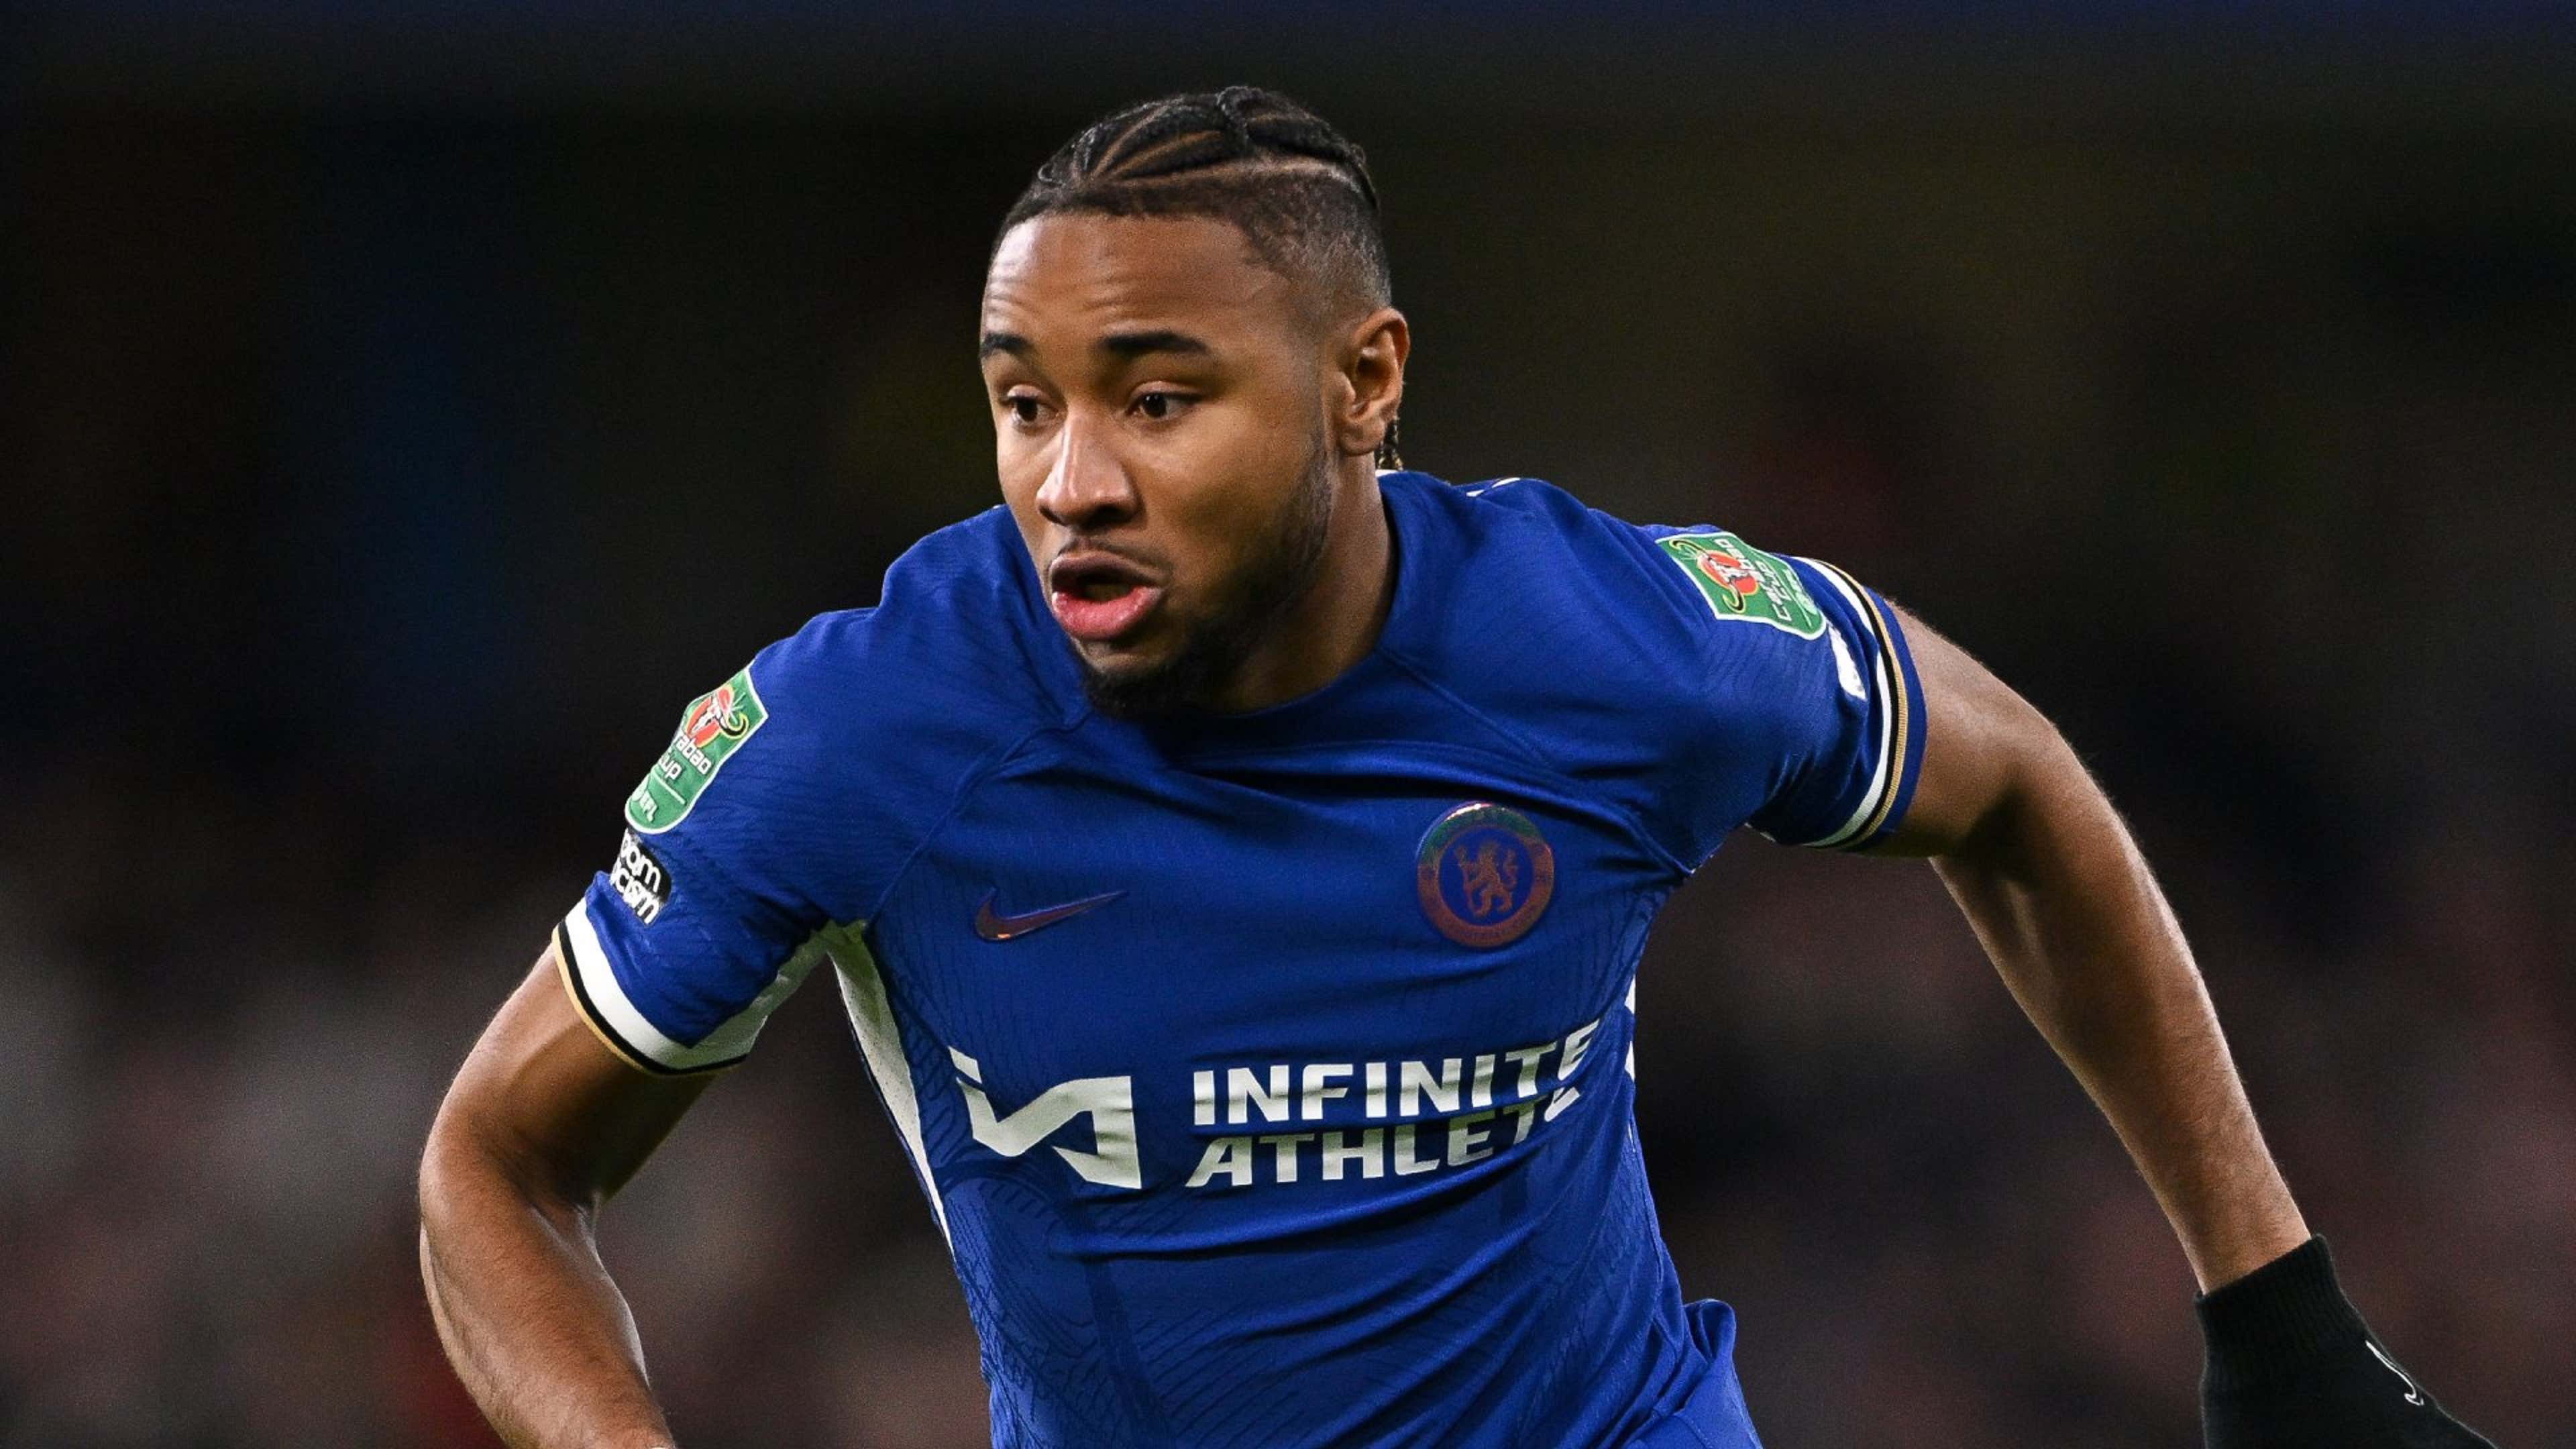 Christopher Nkunku: The French Football Prodigy Lighting Up the Premier League